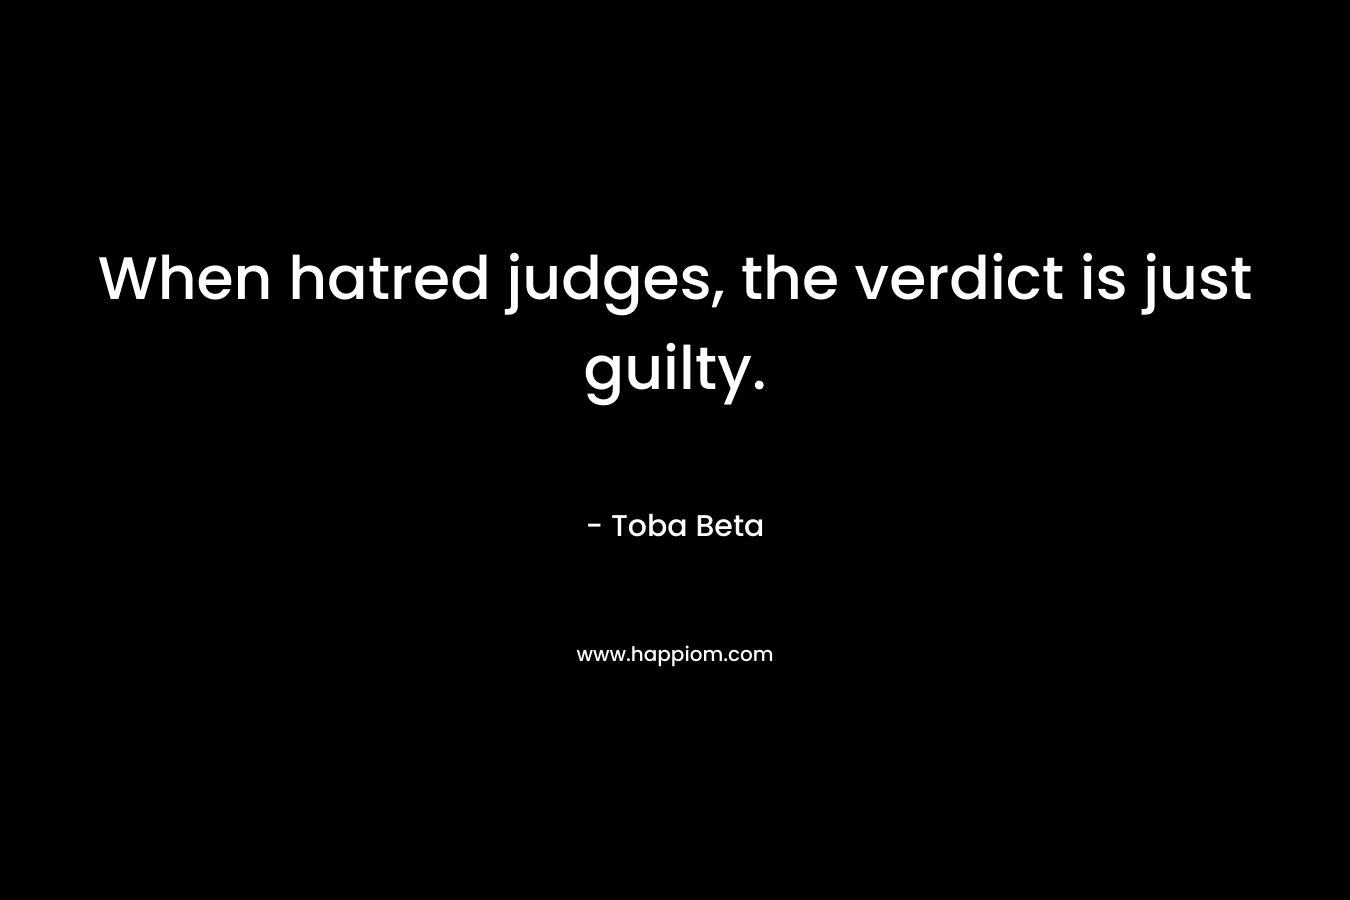 When hatred judges, the verdict is just guilty.